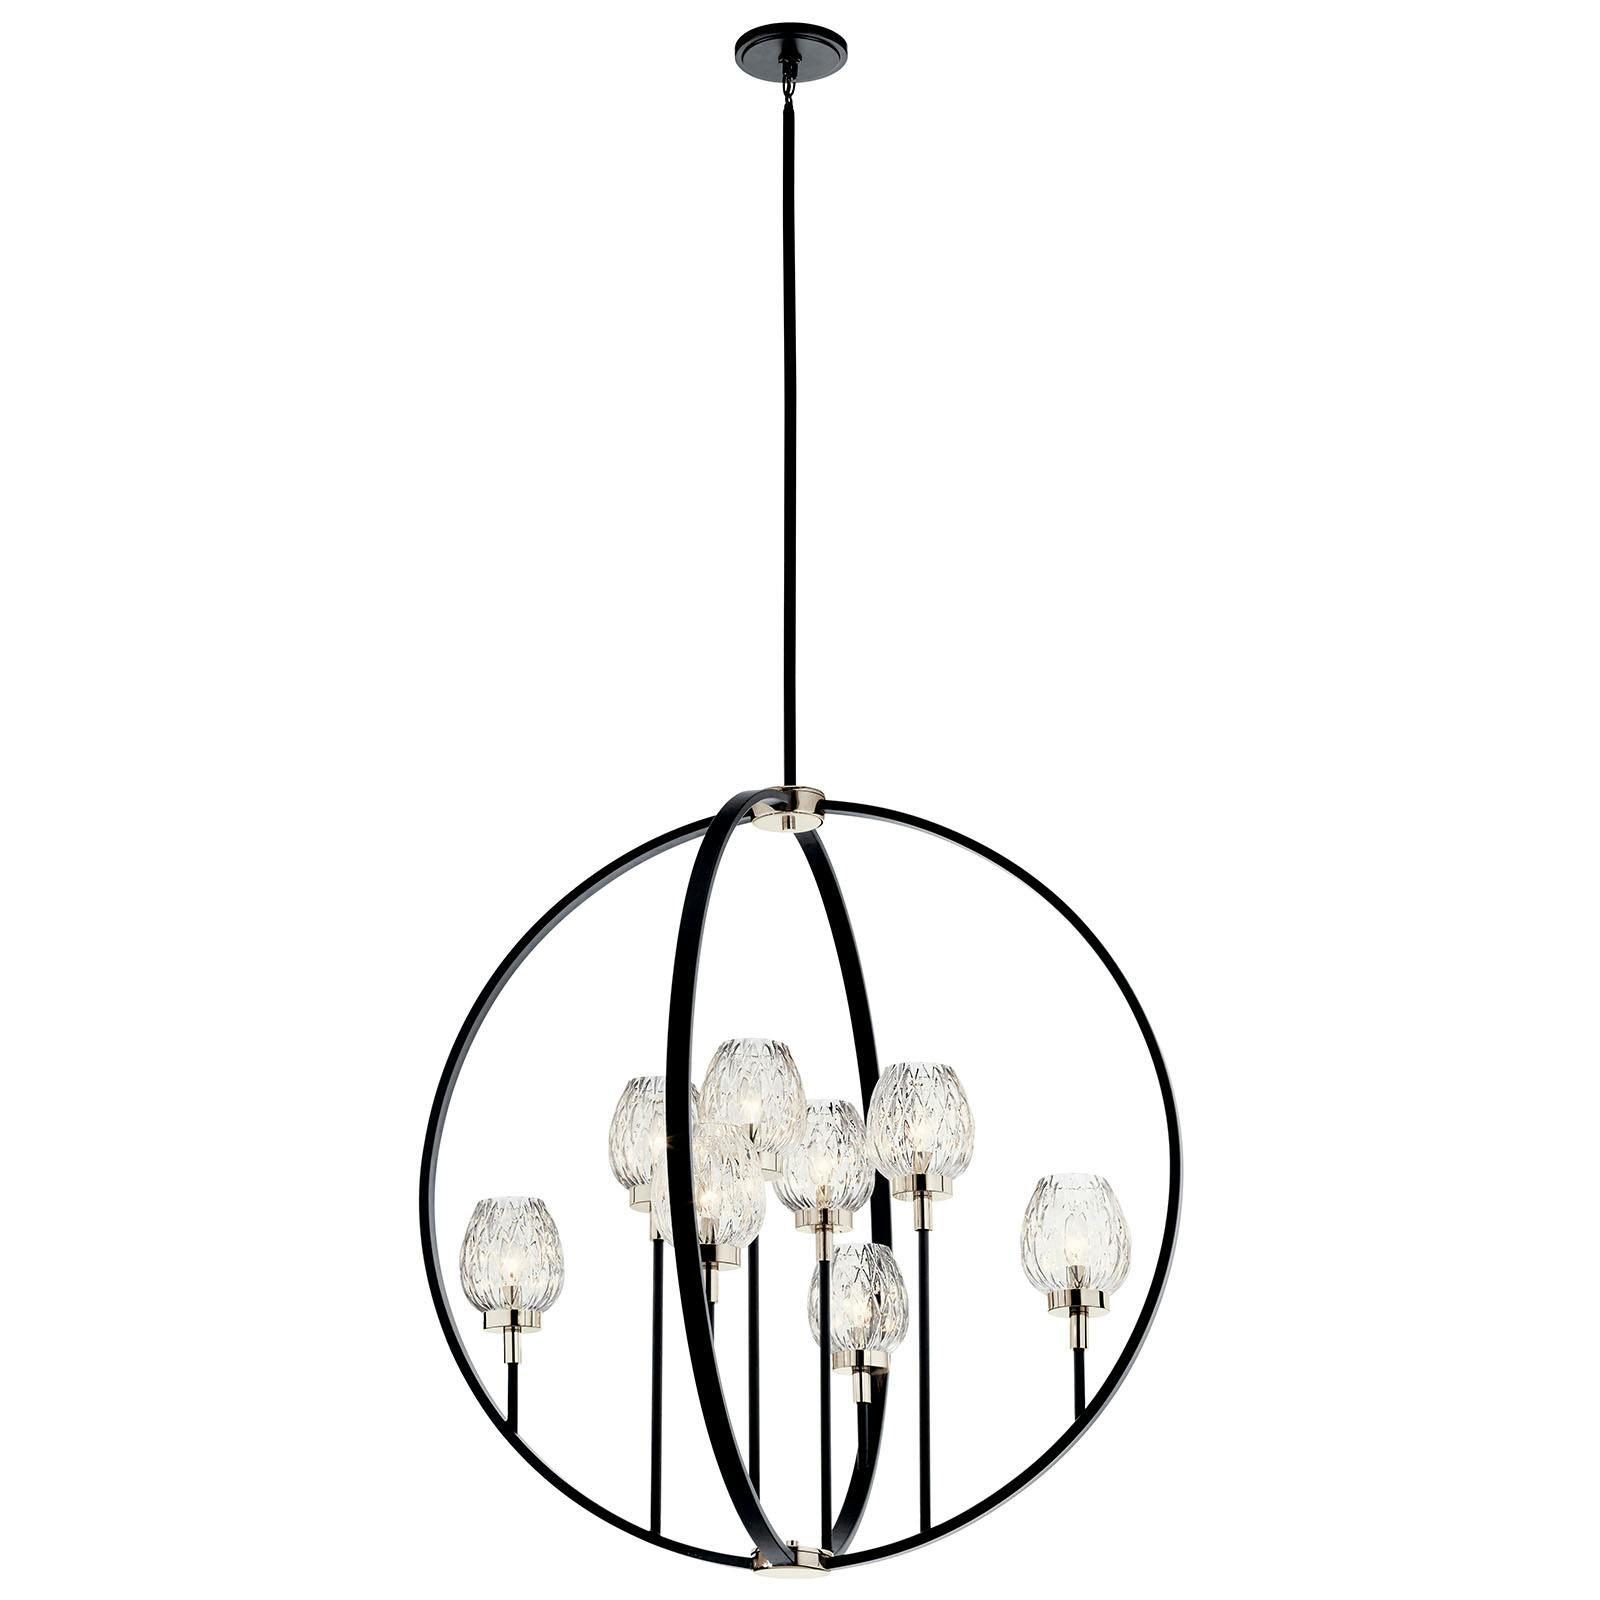 Moyra 8 Light Chandelier in Black on a white background